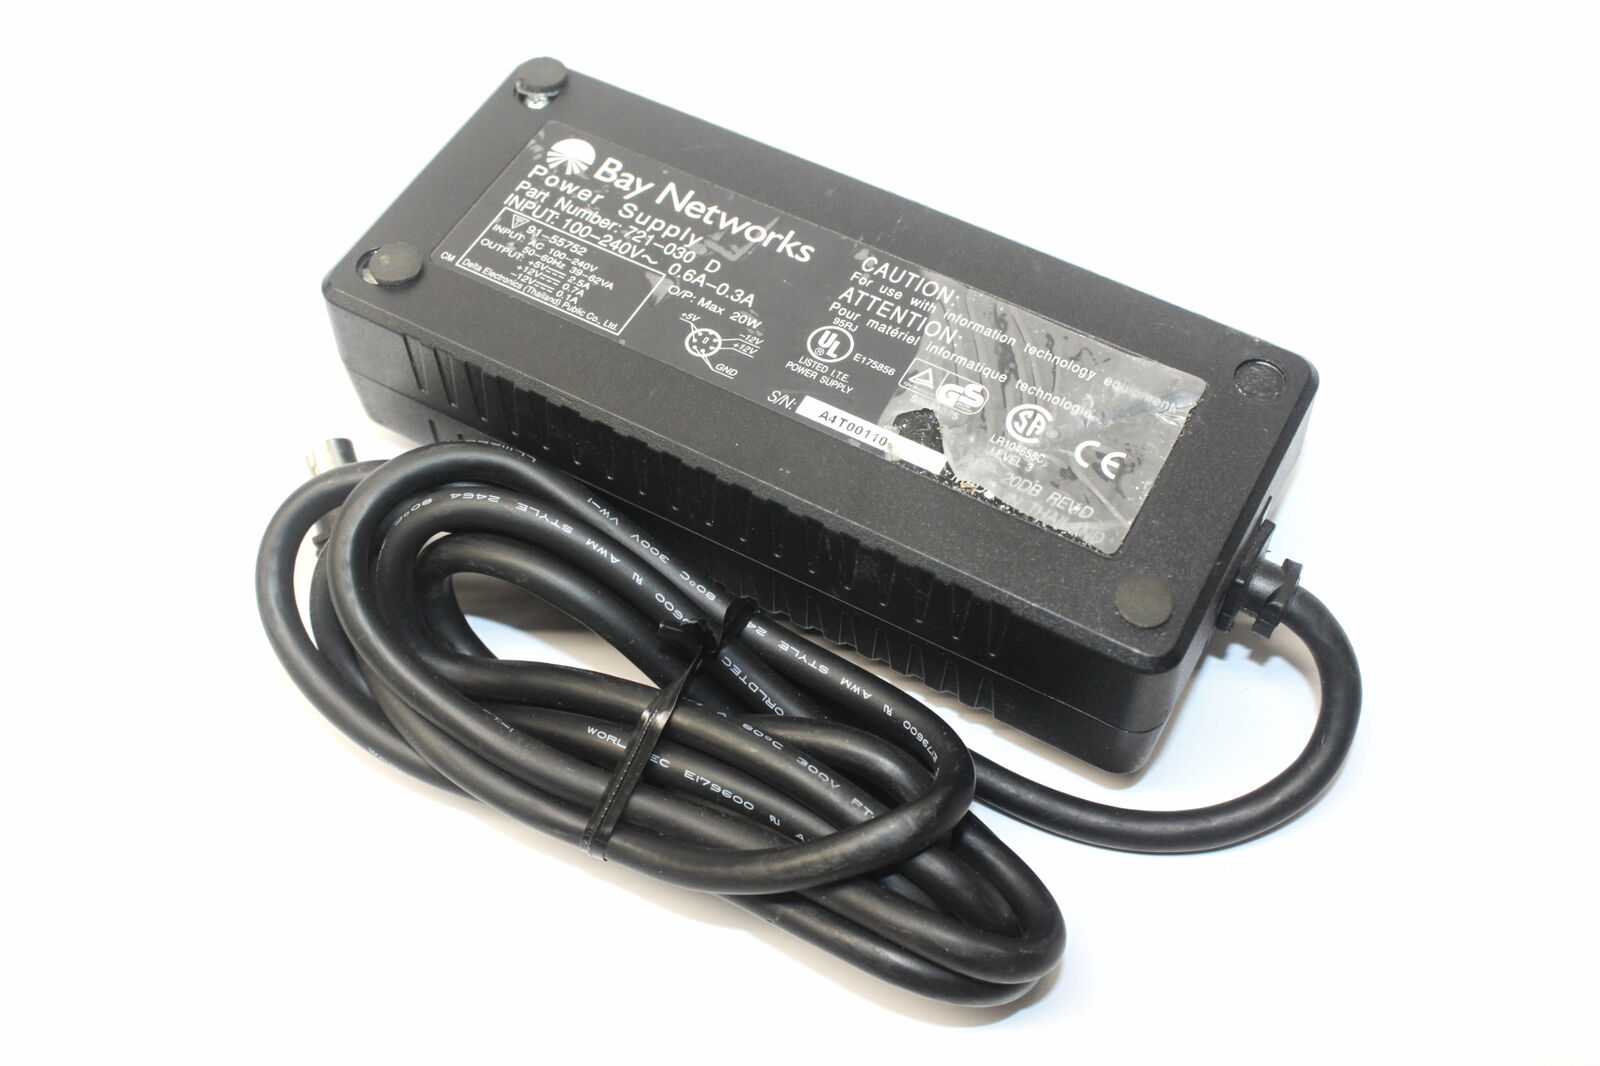 *Brand NEW*Output DC 5V/12V 2.5A/0.7A/0.1A AC Adapter Bay Networks 721-030 D Power Supply